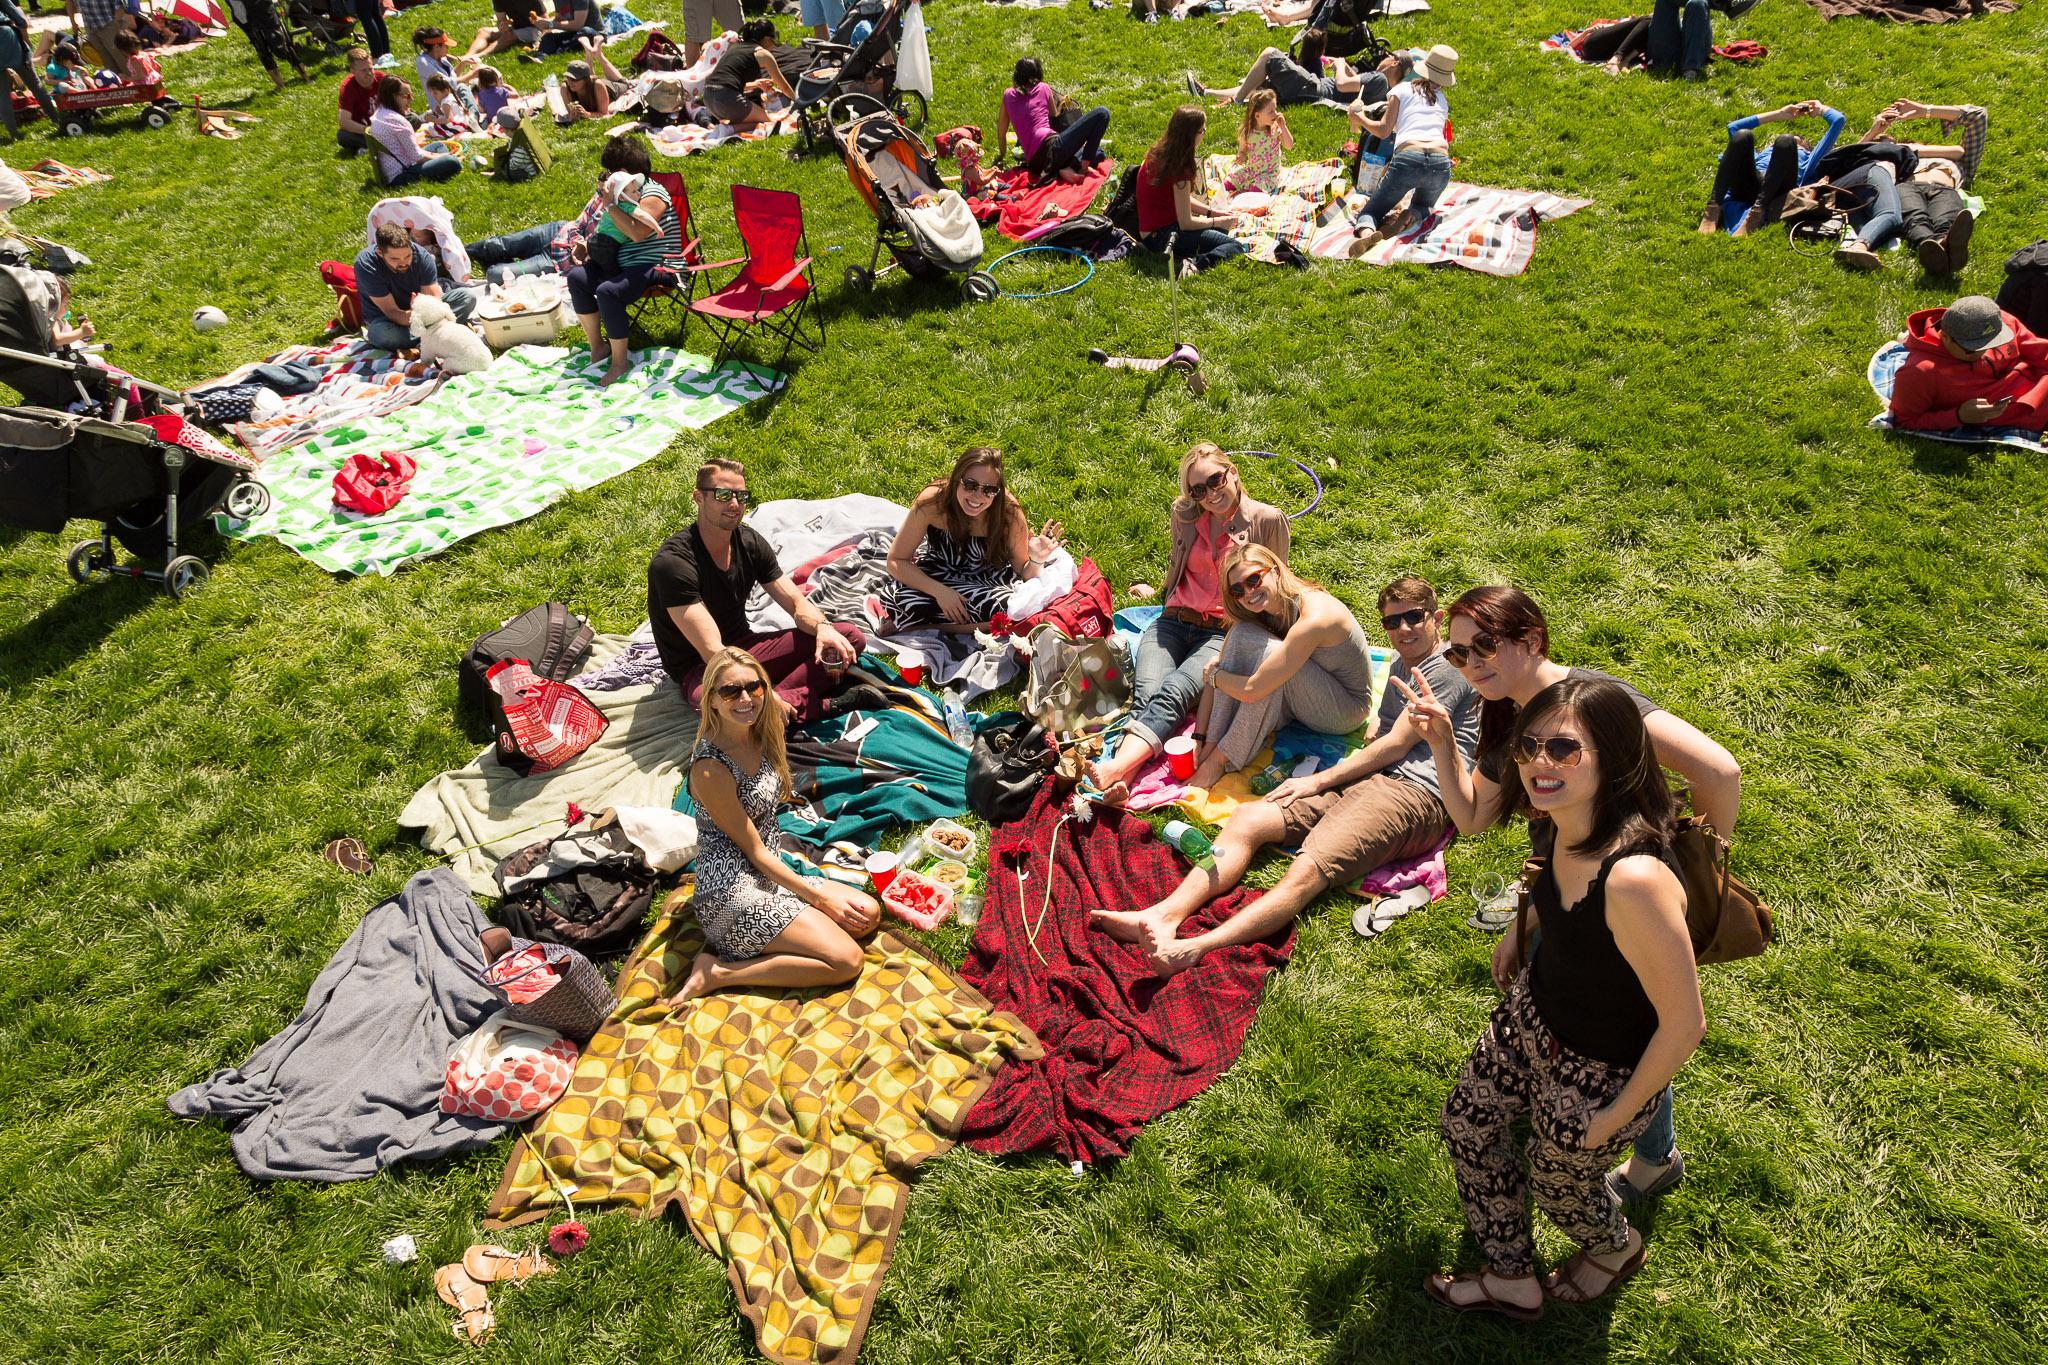 Group of picnickers on Main Parade Lawn